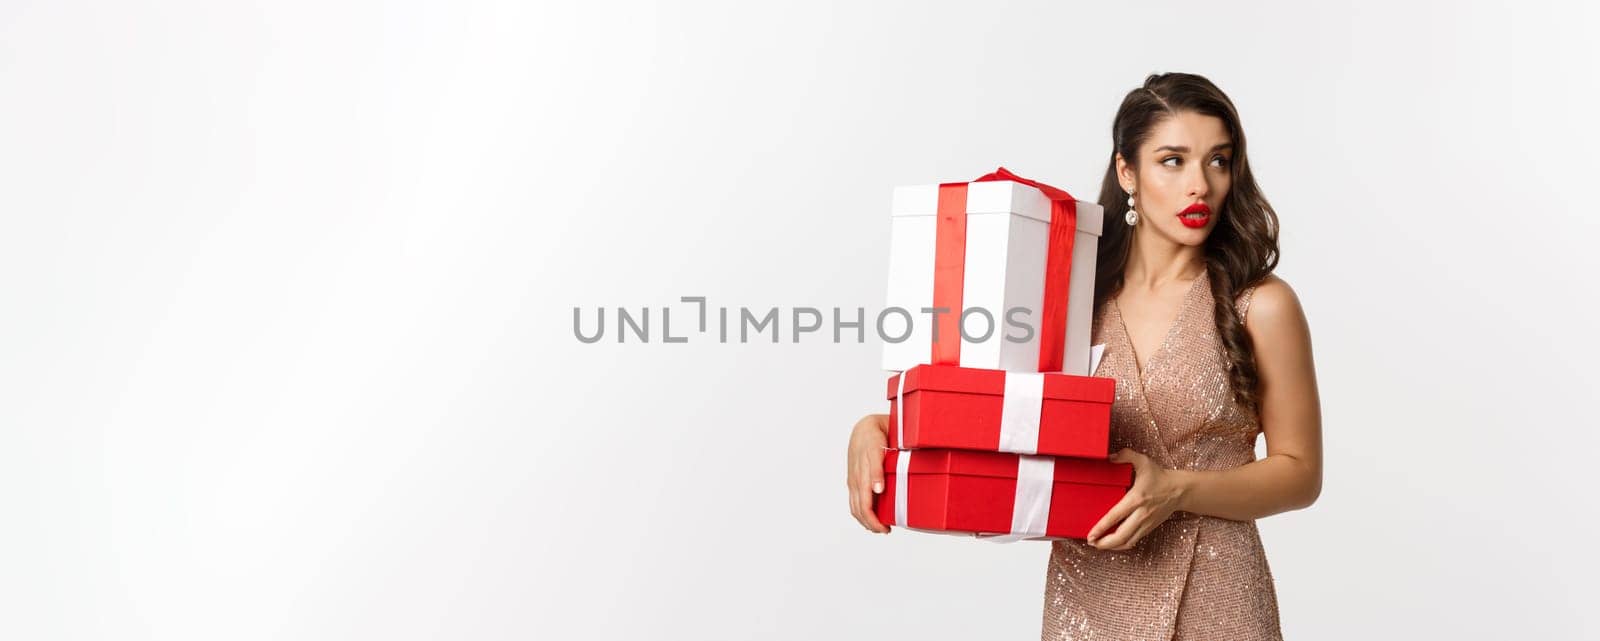 New Year, Christmas and celebration concept. Attractive young woman in elegant dress, looking away, carry gifts, standing over white background.